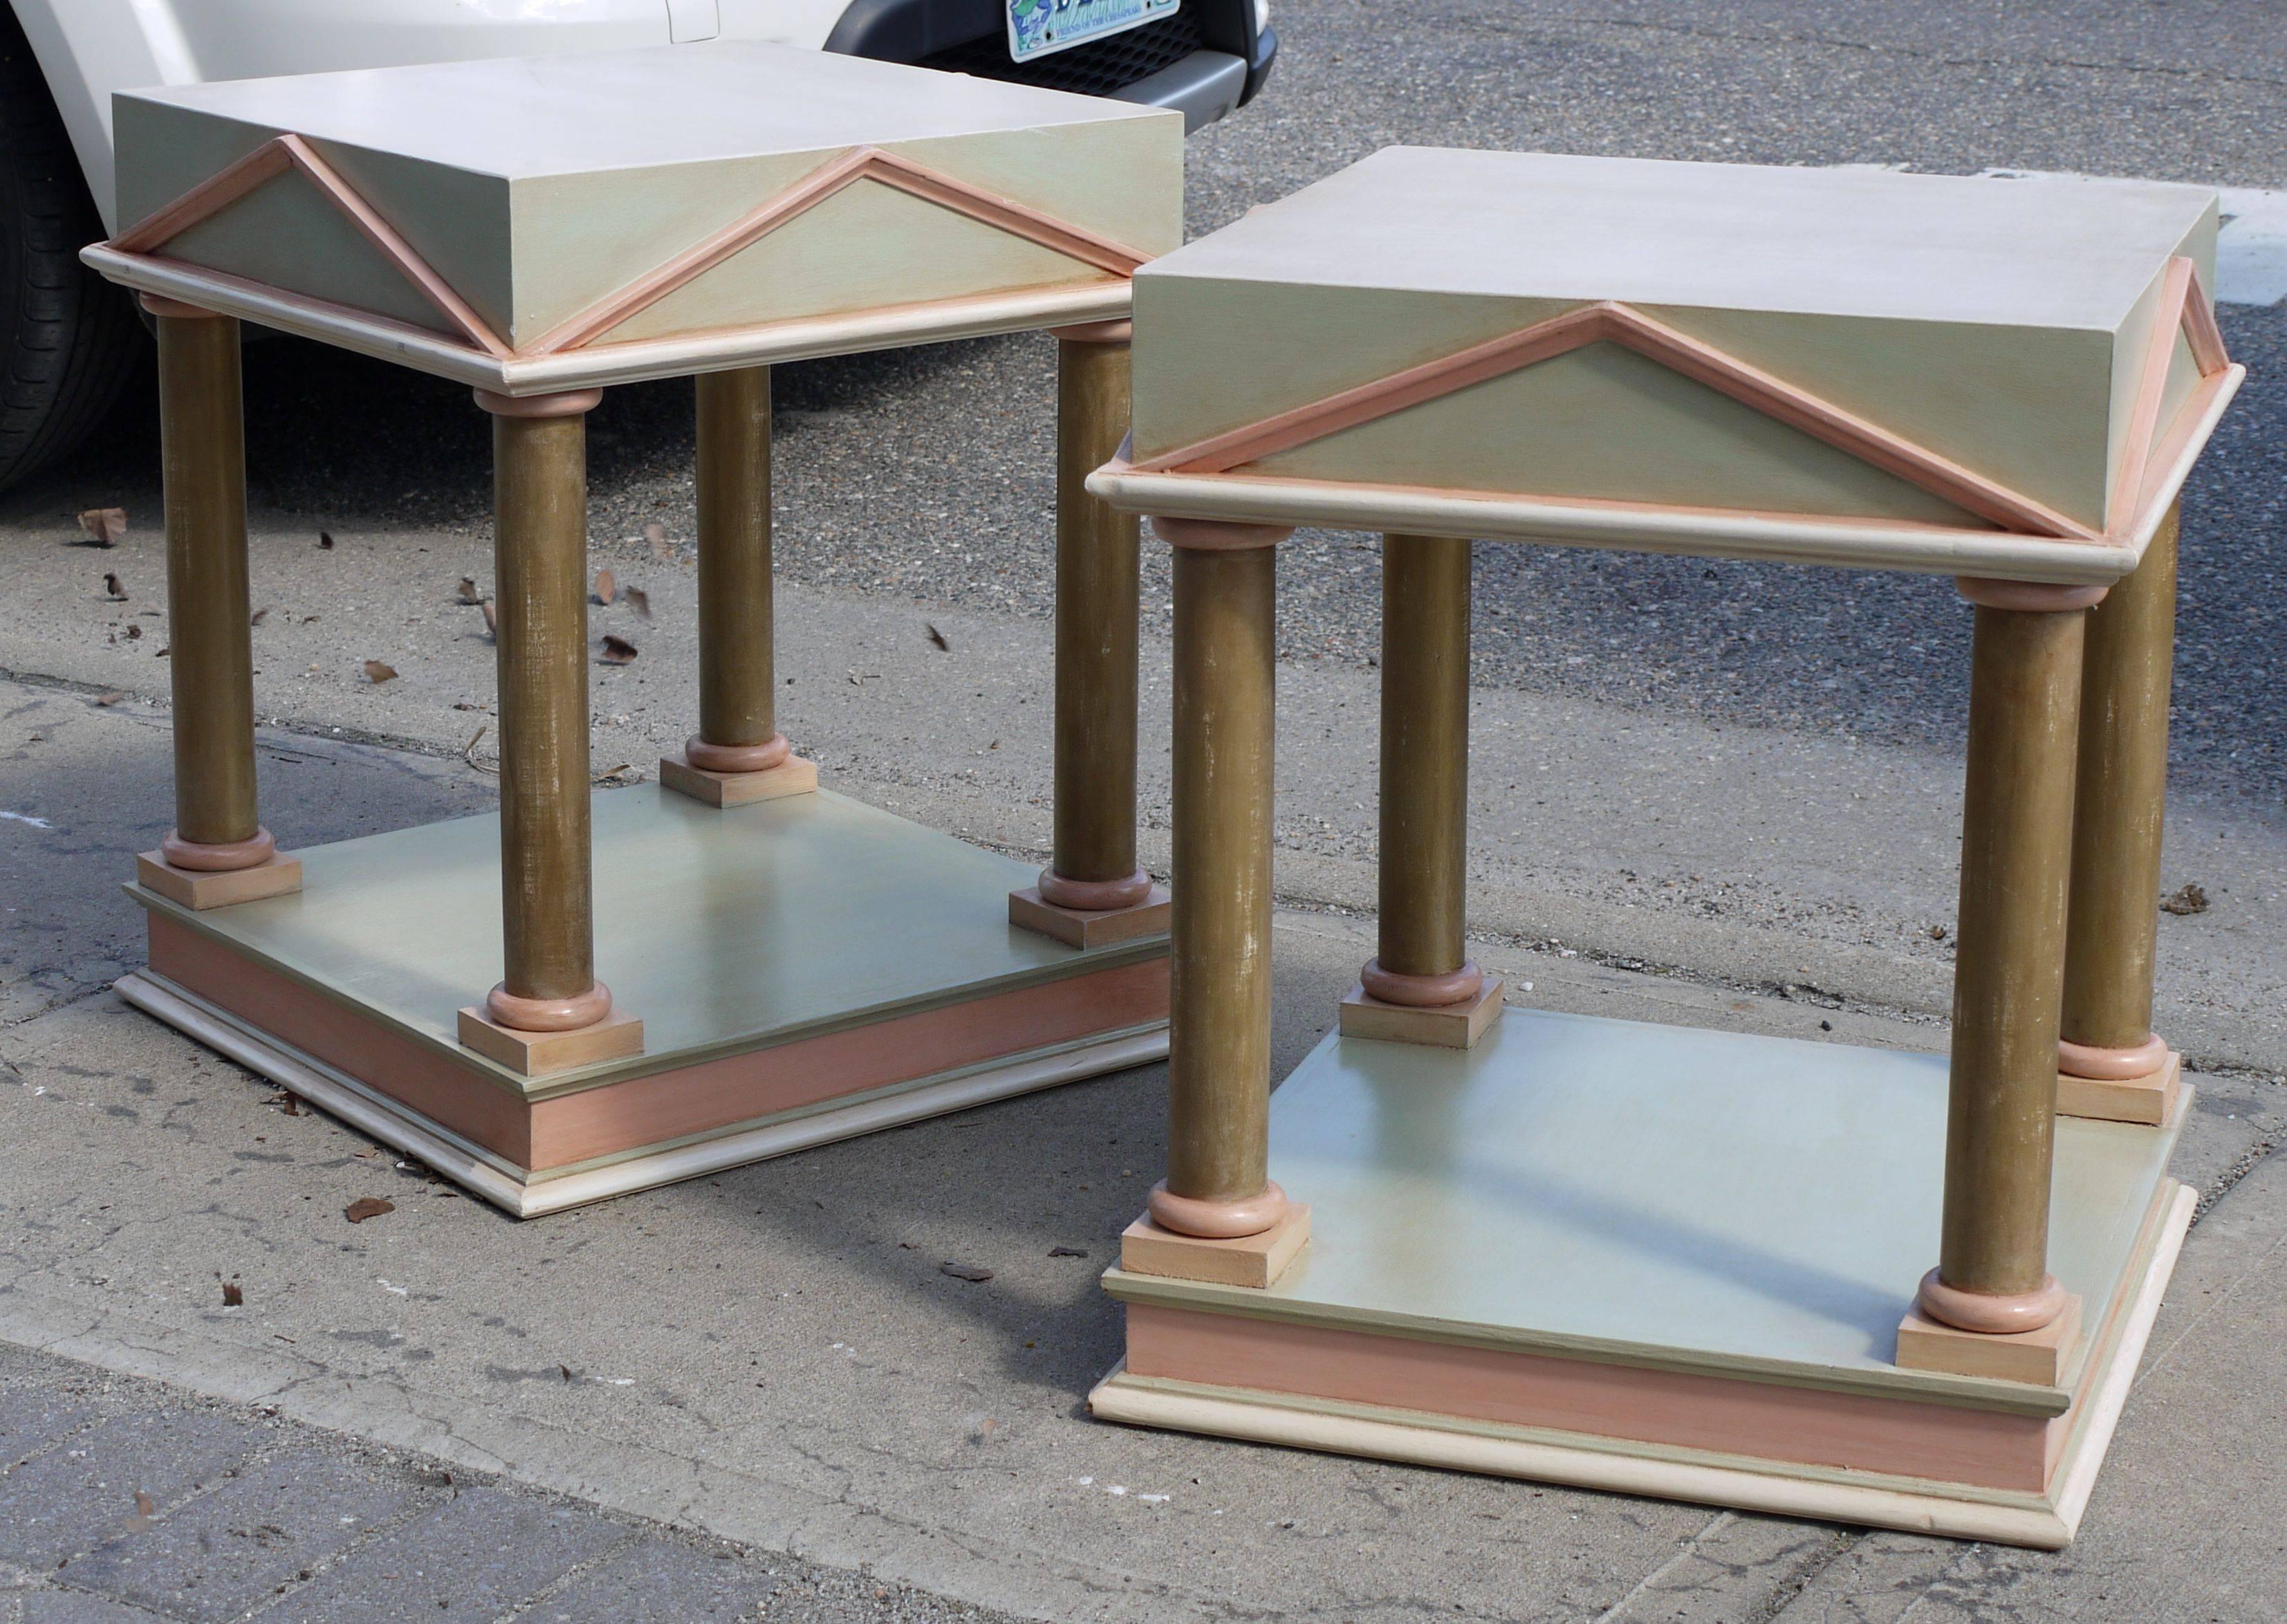 Wonderful neoclassical inspired tables done in three shades of lacquer and a rubbed gold finish on the columns. These look to be a production table and could be used as end or side tables or even bedside tables in the right room. The scale is